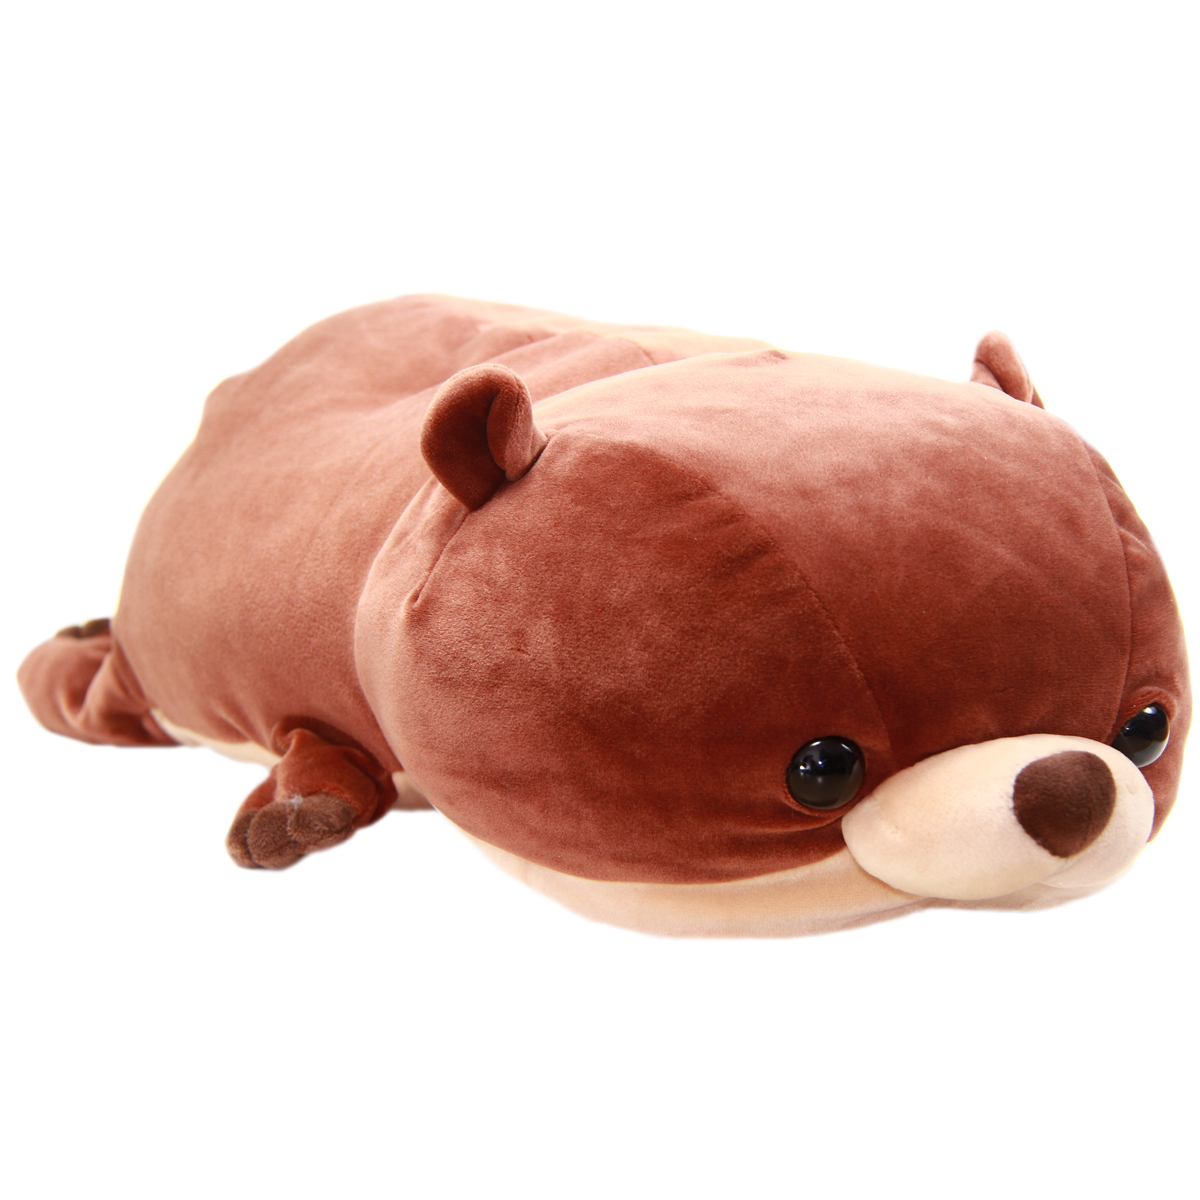 Mochi Puni Kawauso Collection Super Soft Otter Plush Toy Brown Big Size 15 Inches